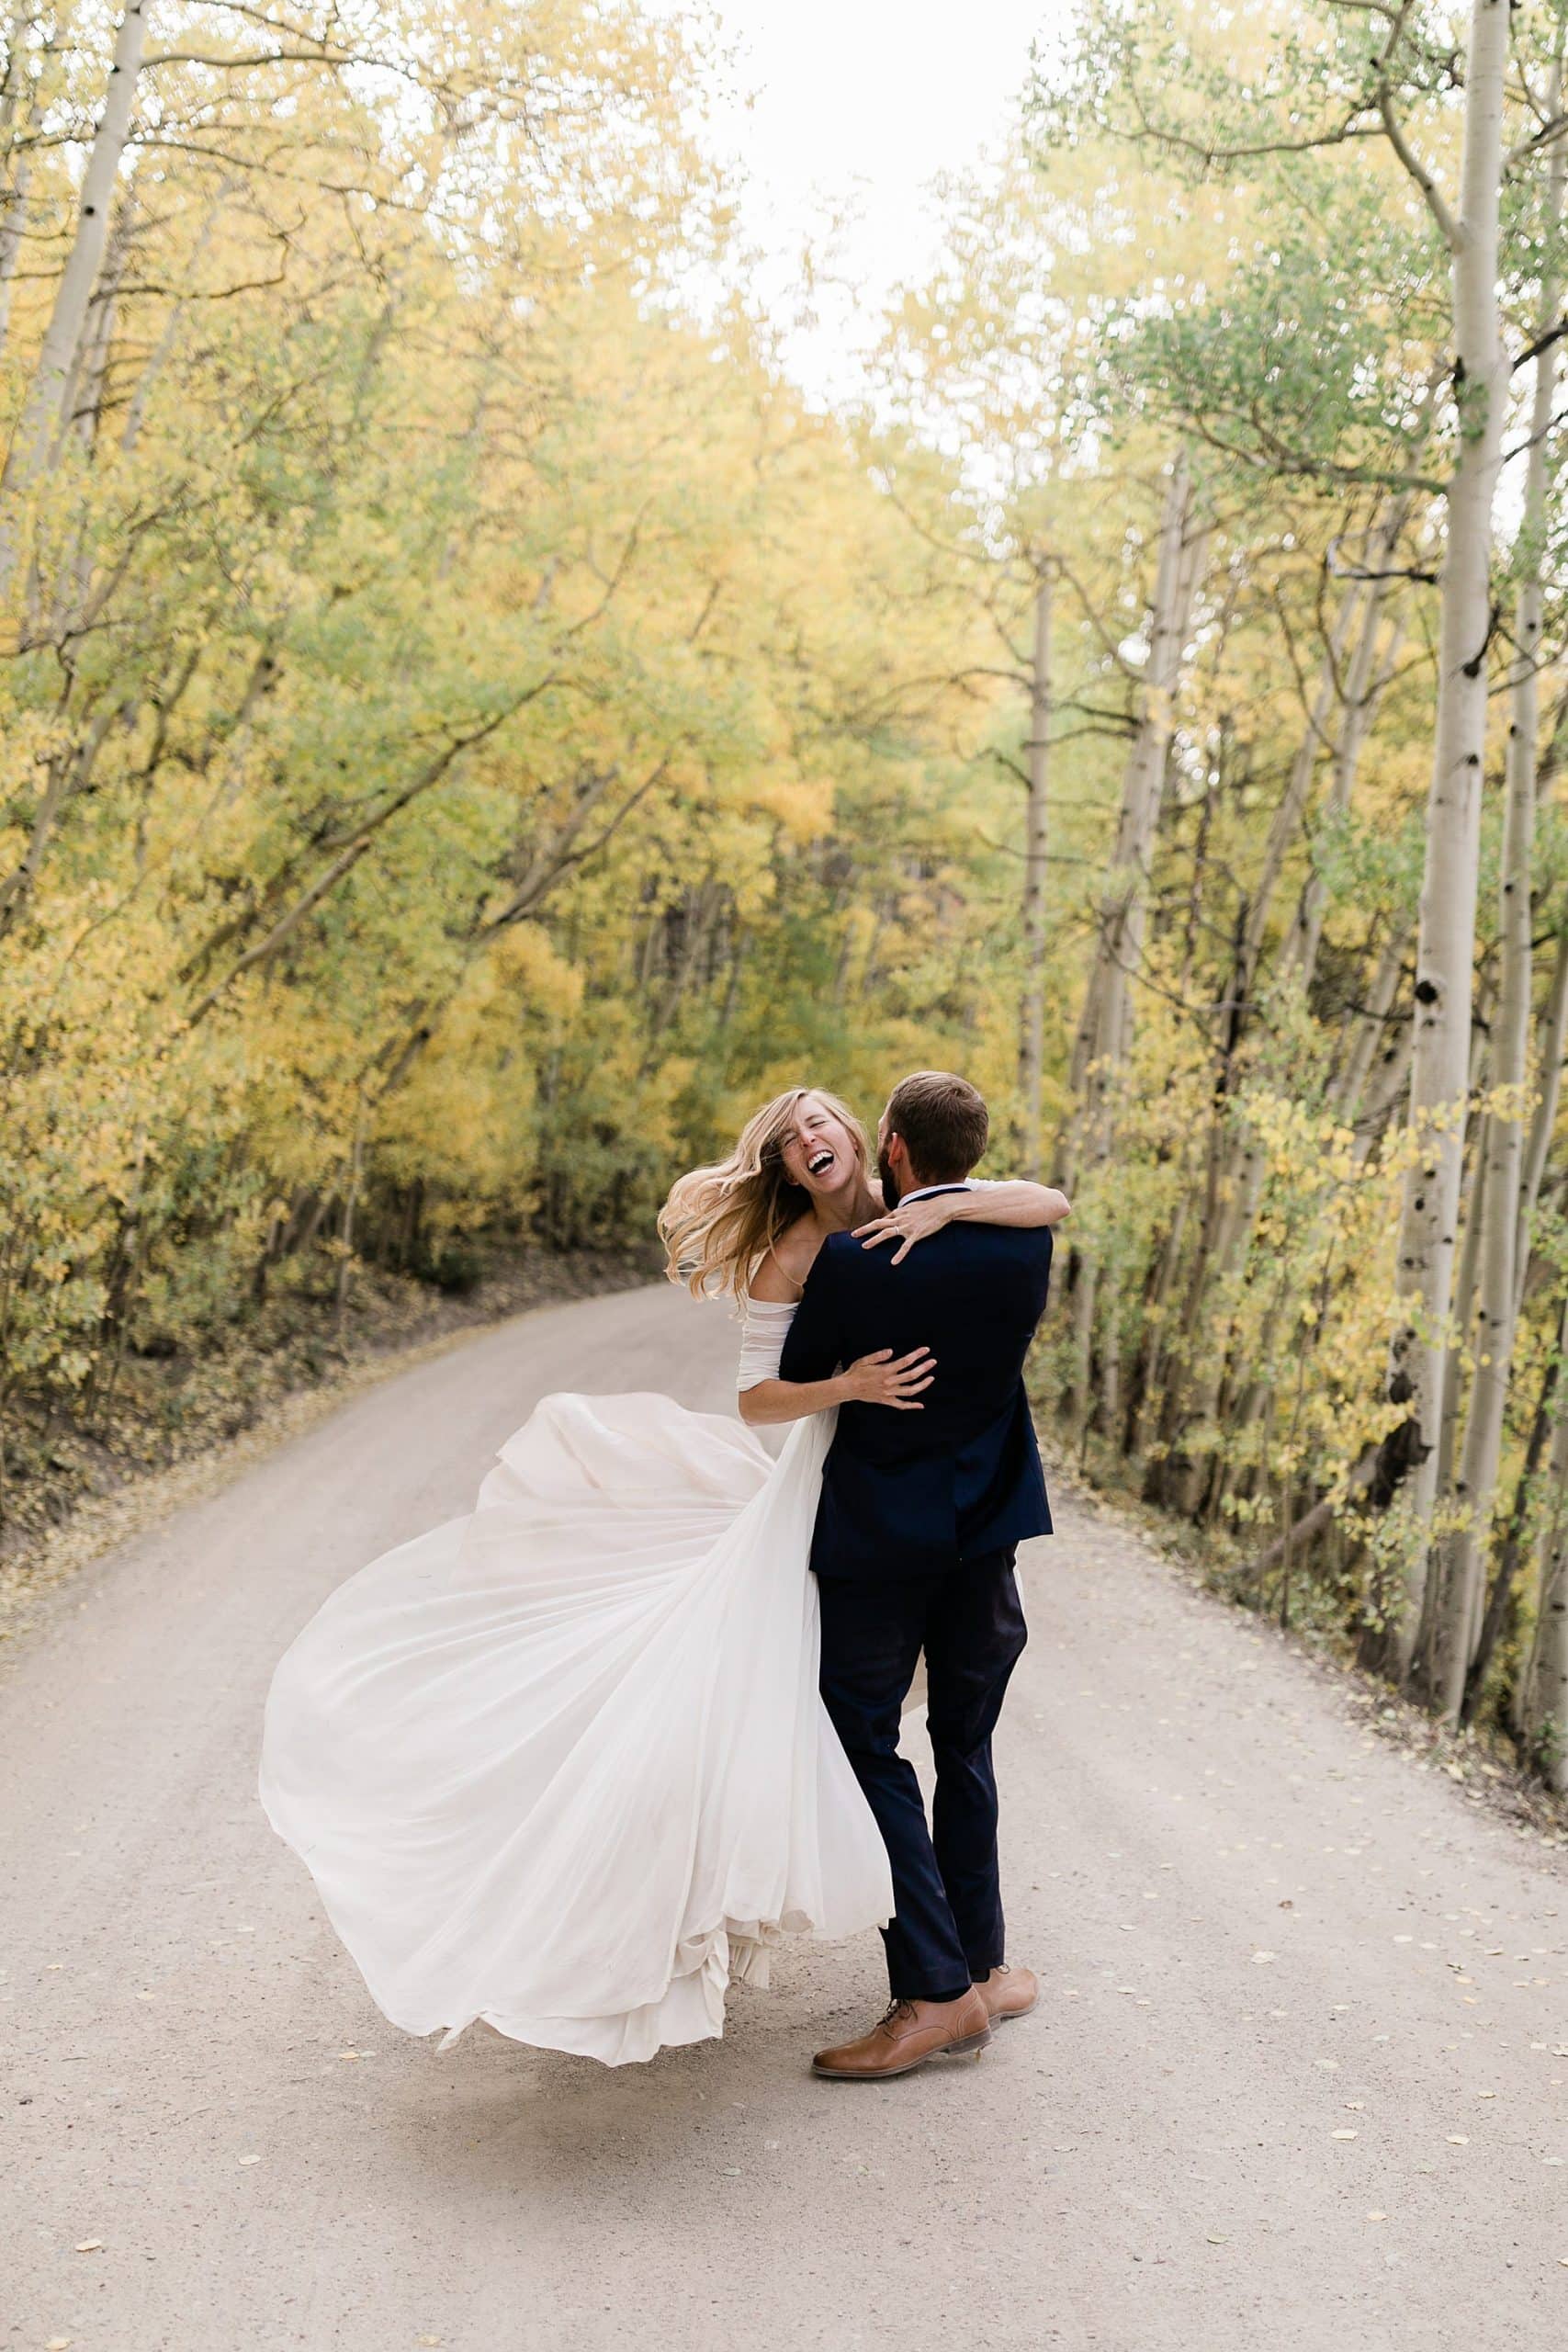 Newlyweds spin in excitement after their elopement in Colorado on trail near aspen trees 